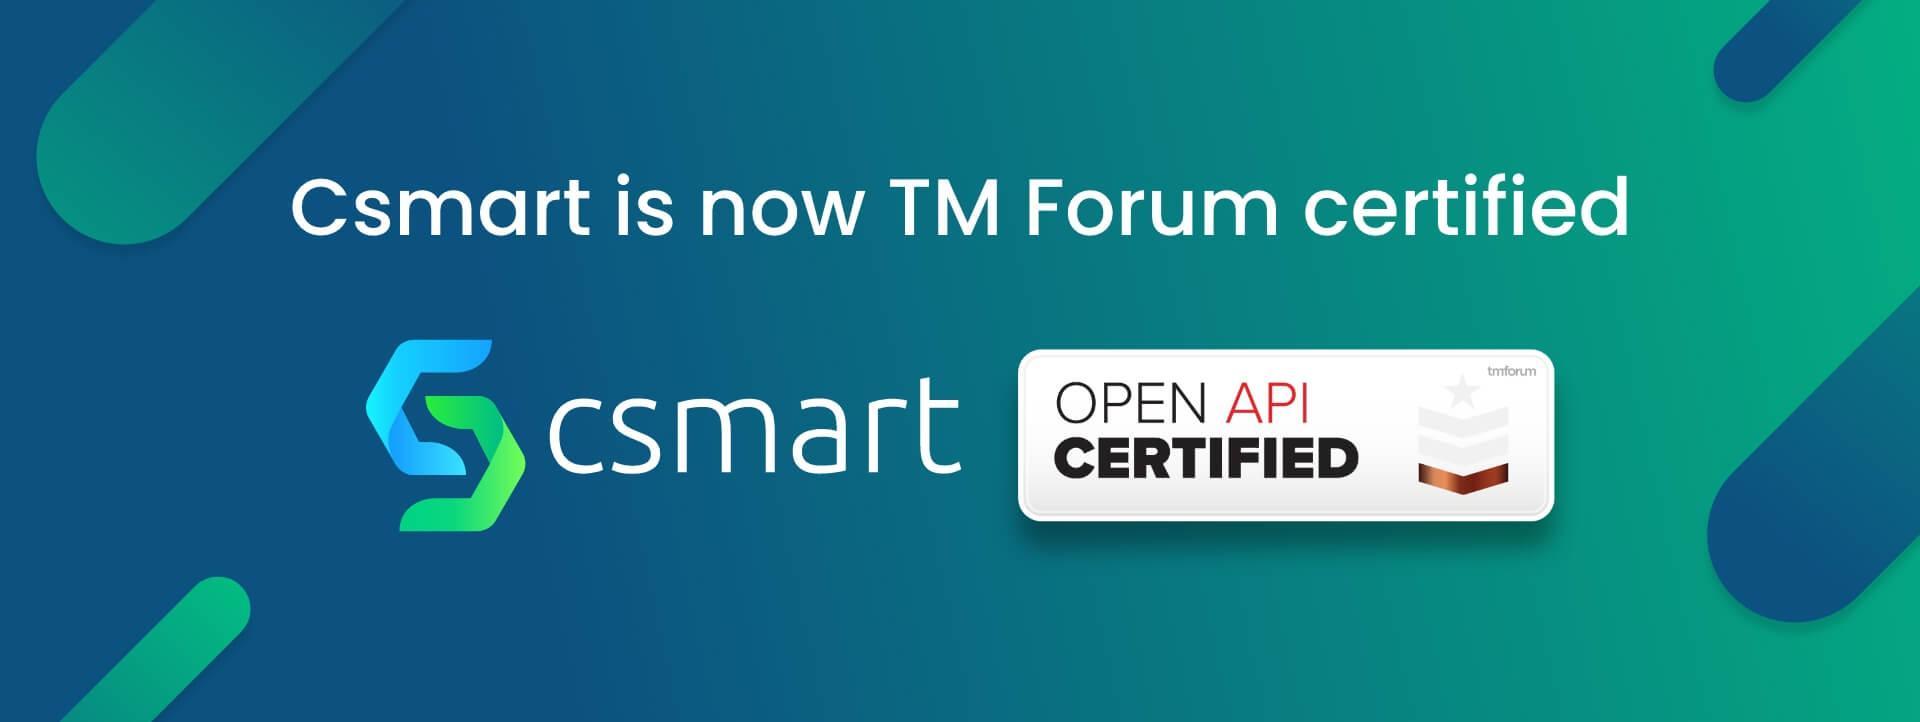 Csmart awarded with TM Forum certification